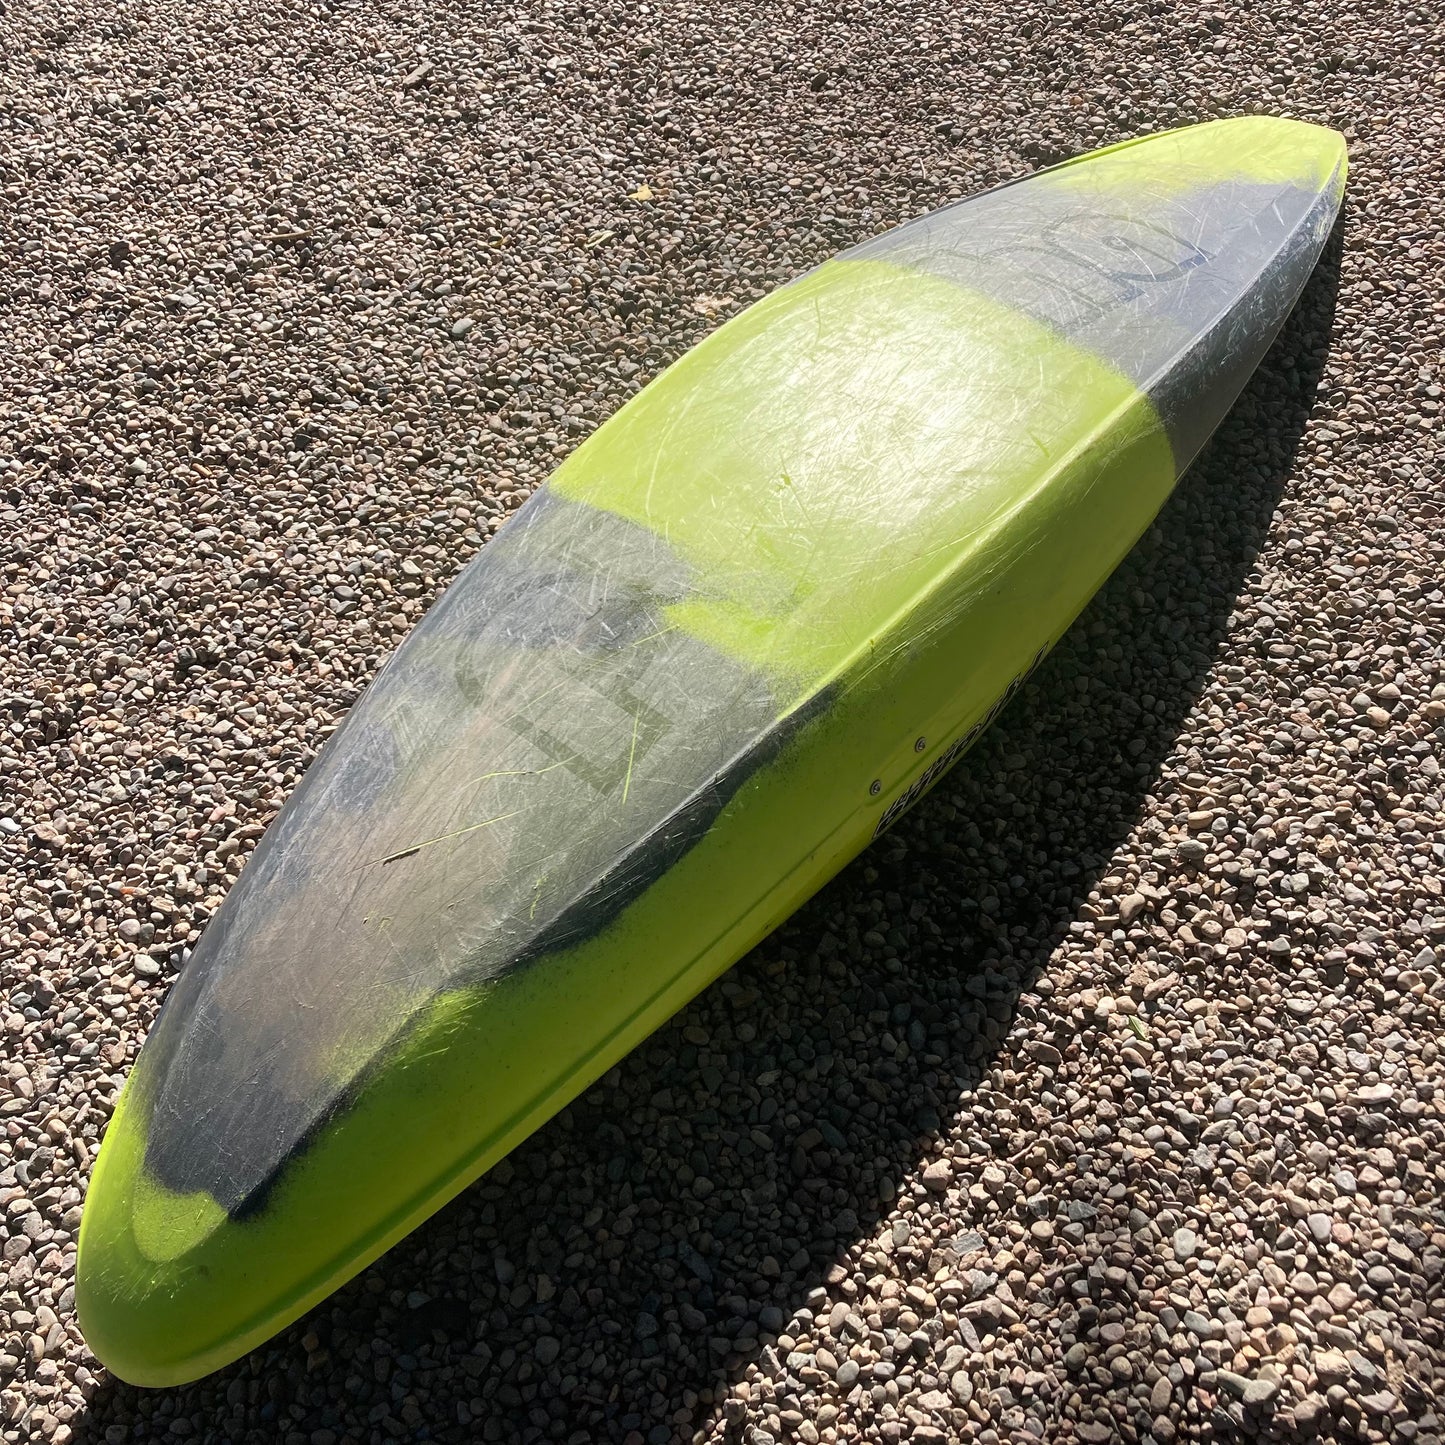 A yellow and black Demo Ripper 2.0 MD surfboard laying on the ground, made by Pyranha.